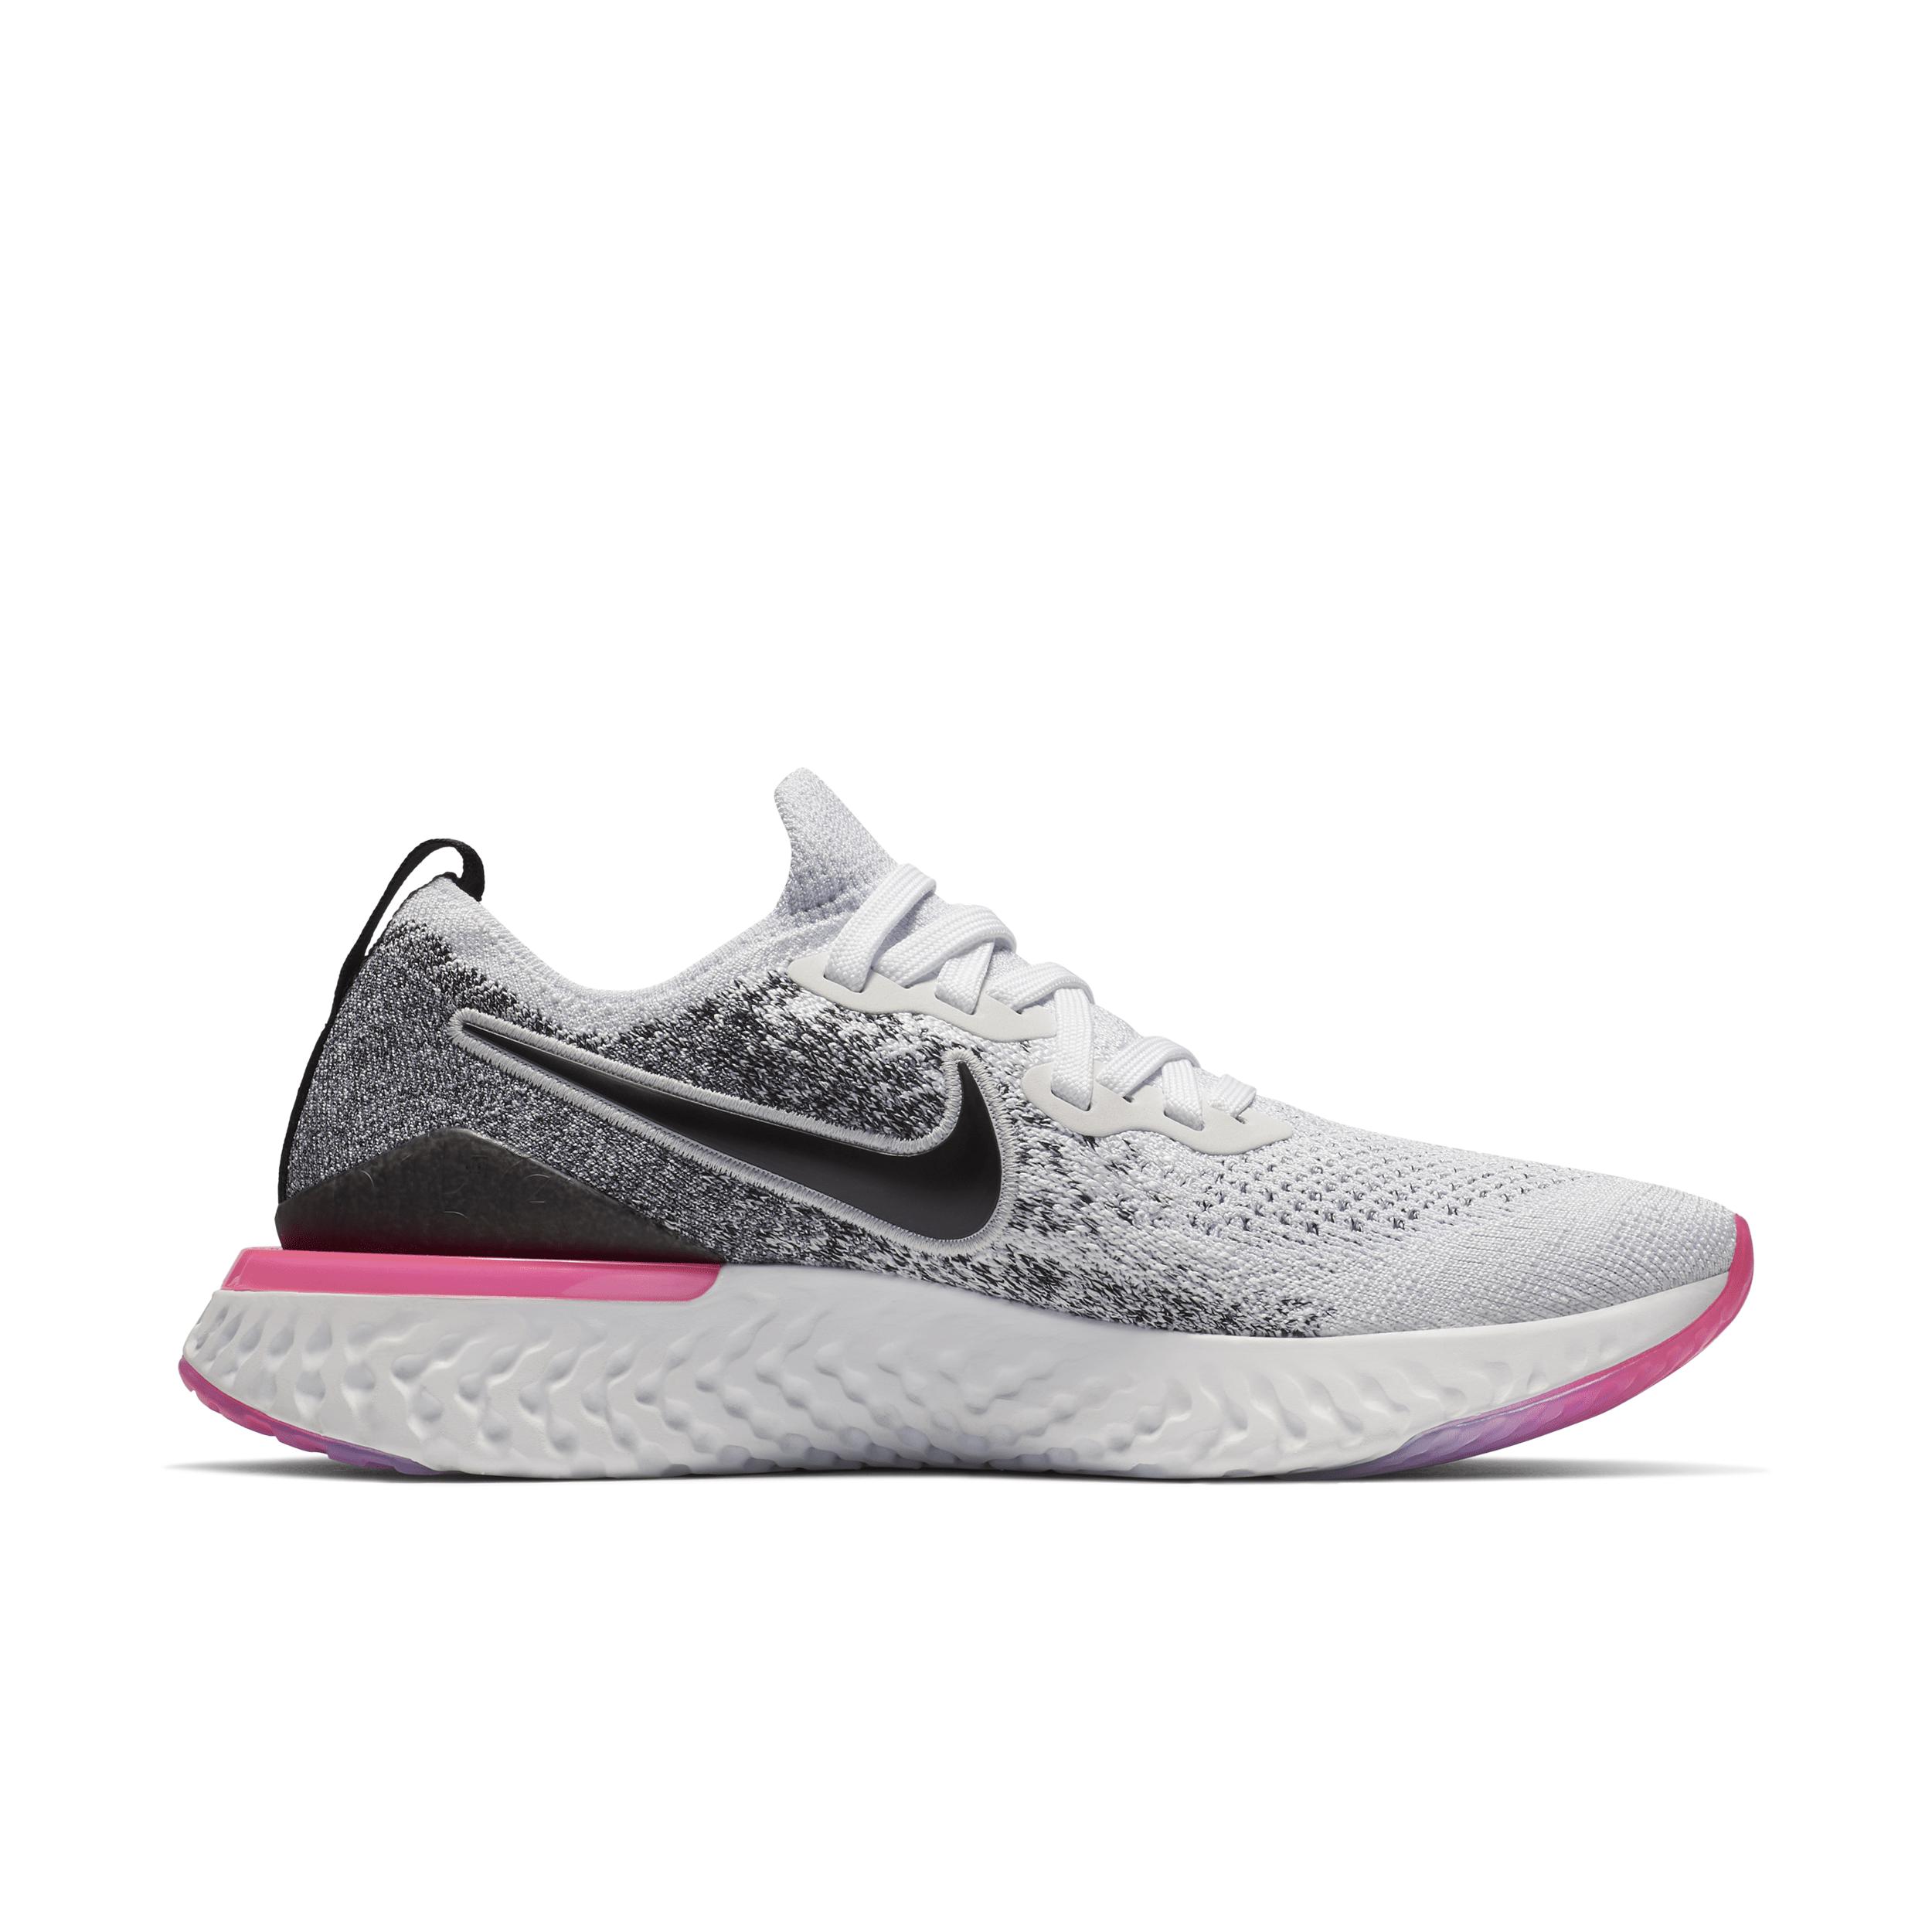 Nike Epic React Flyknit 2 Running Shoes in Gray | Lyst